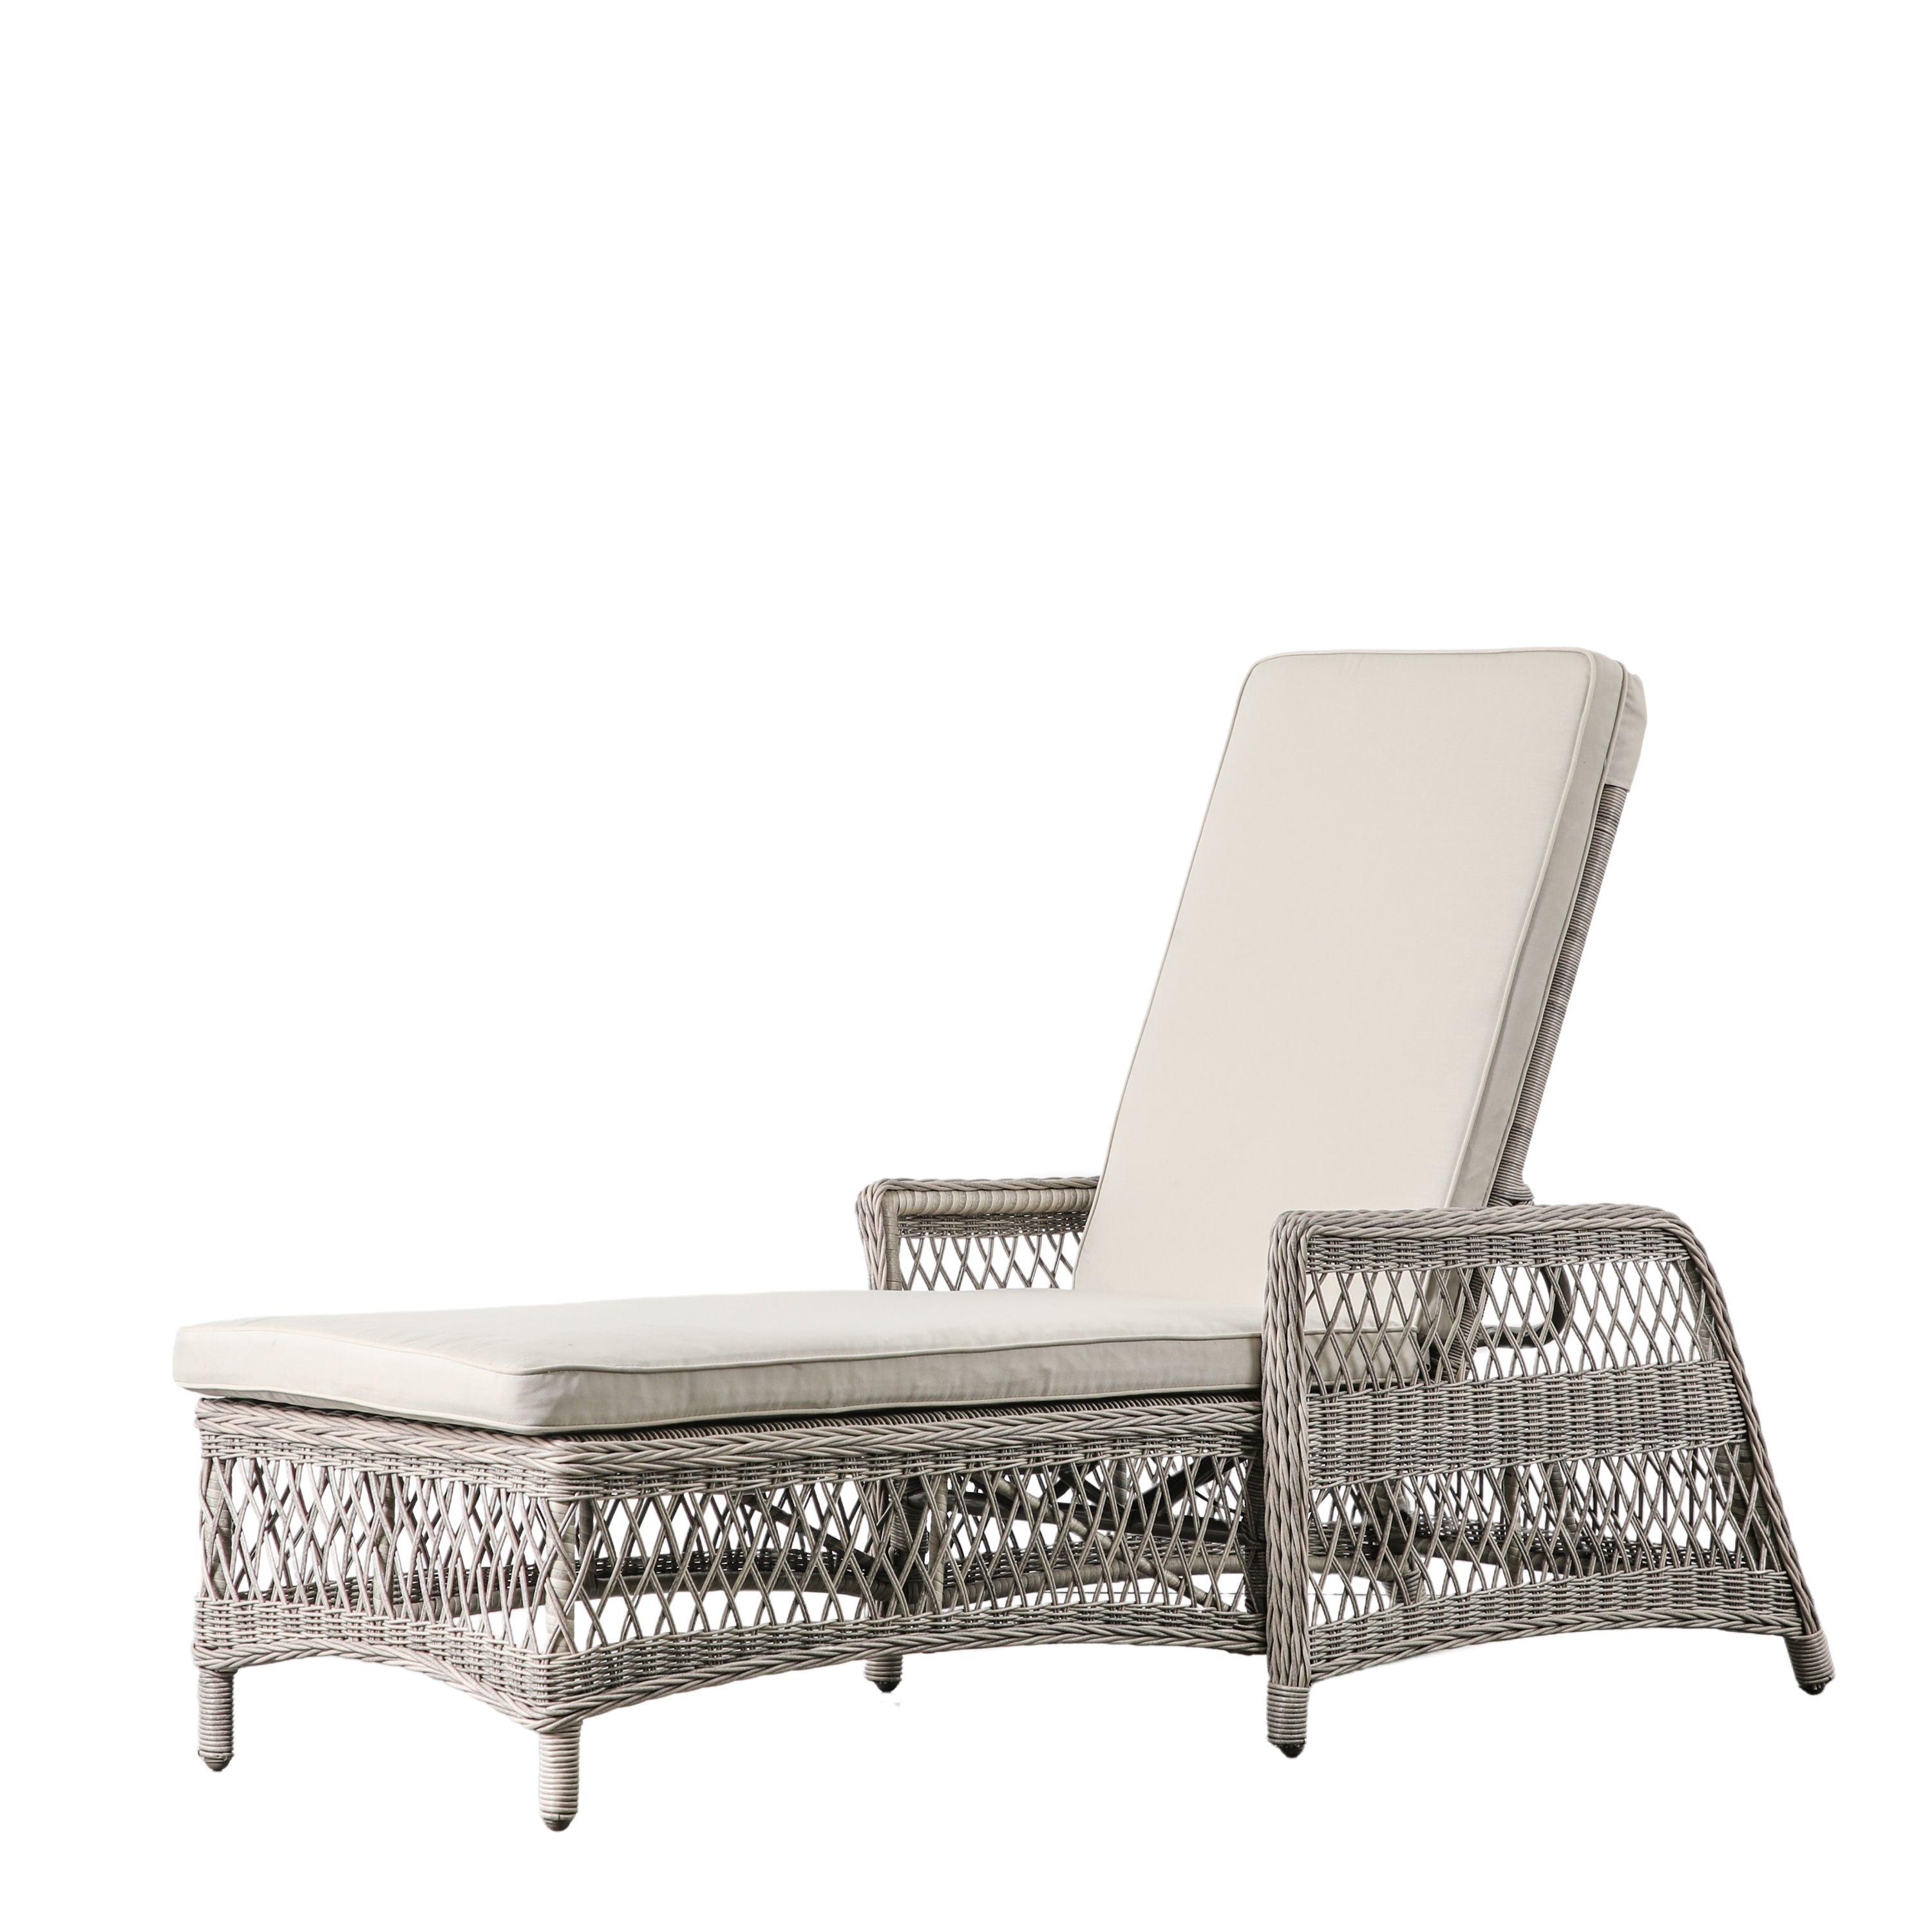 Evesmith Country Single Outdoor Sun Lounger Stone - Maison Rêves UK